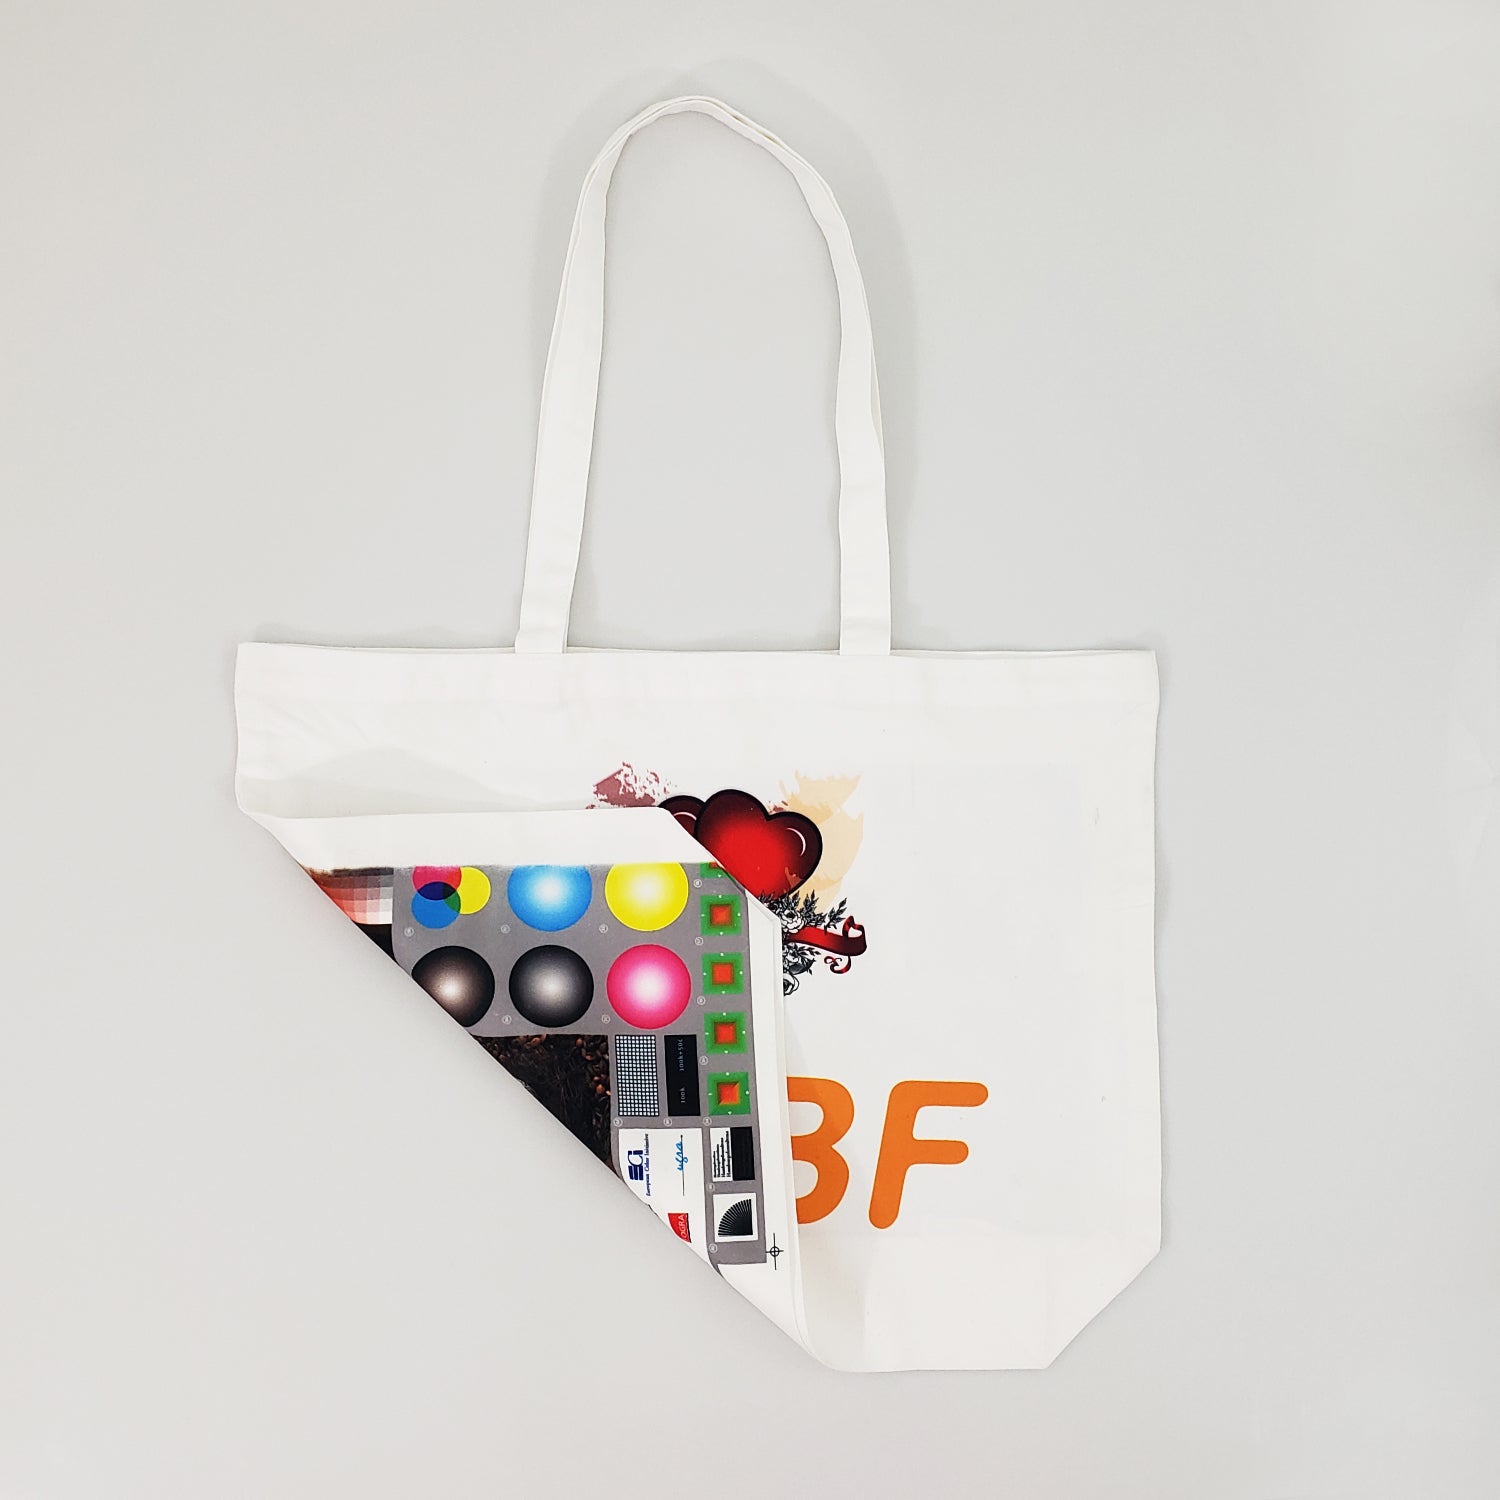 Weewooday Sublimation Blanks Tote Bags Polyester Panel Bags India | Ubuy